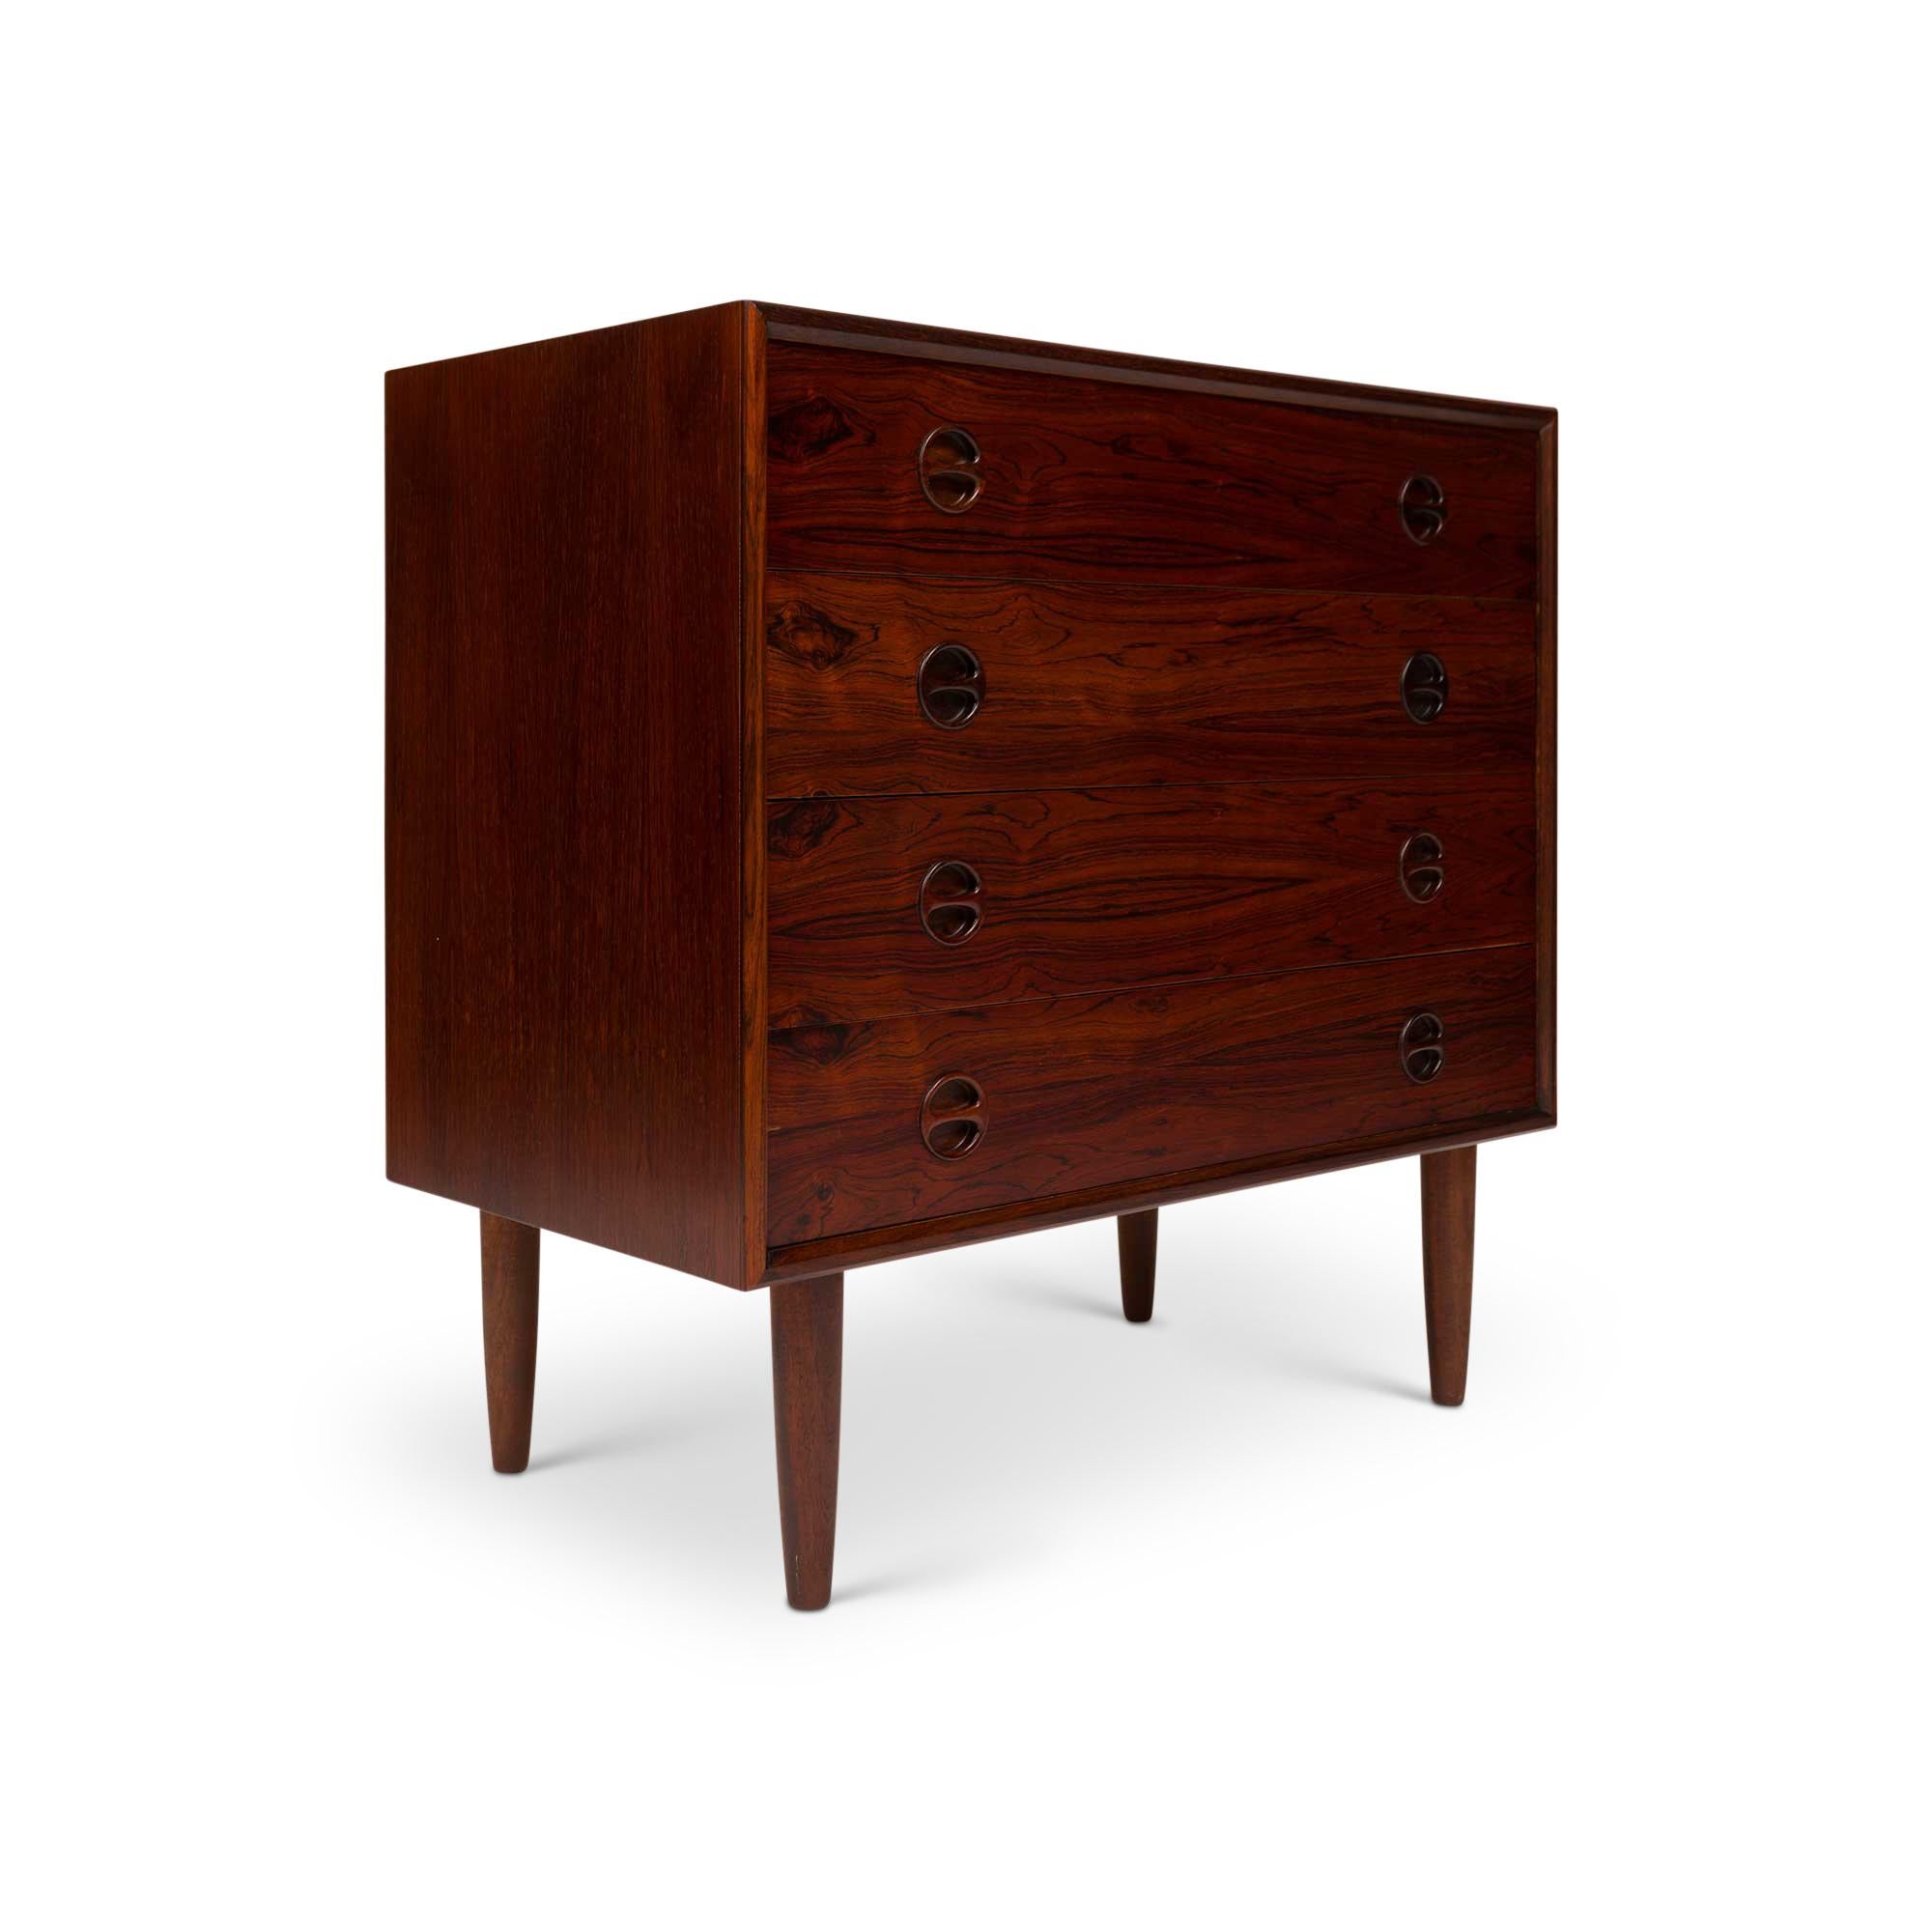 This stunning Danish mid-century rosewood dresser from the 1960s epitomizes timeless design. Its exquisite rosewood-grain detailing and sleek four-drawer structure, accented by circular round pulls, harmonizes form and functions flawlessly.